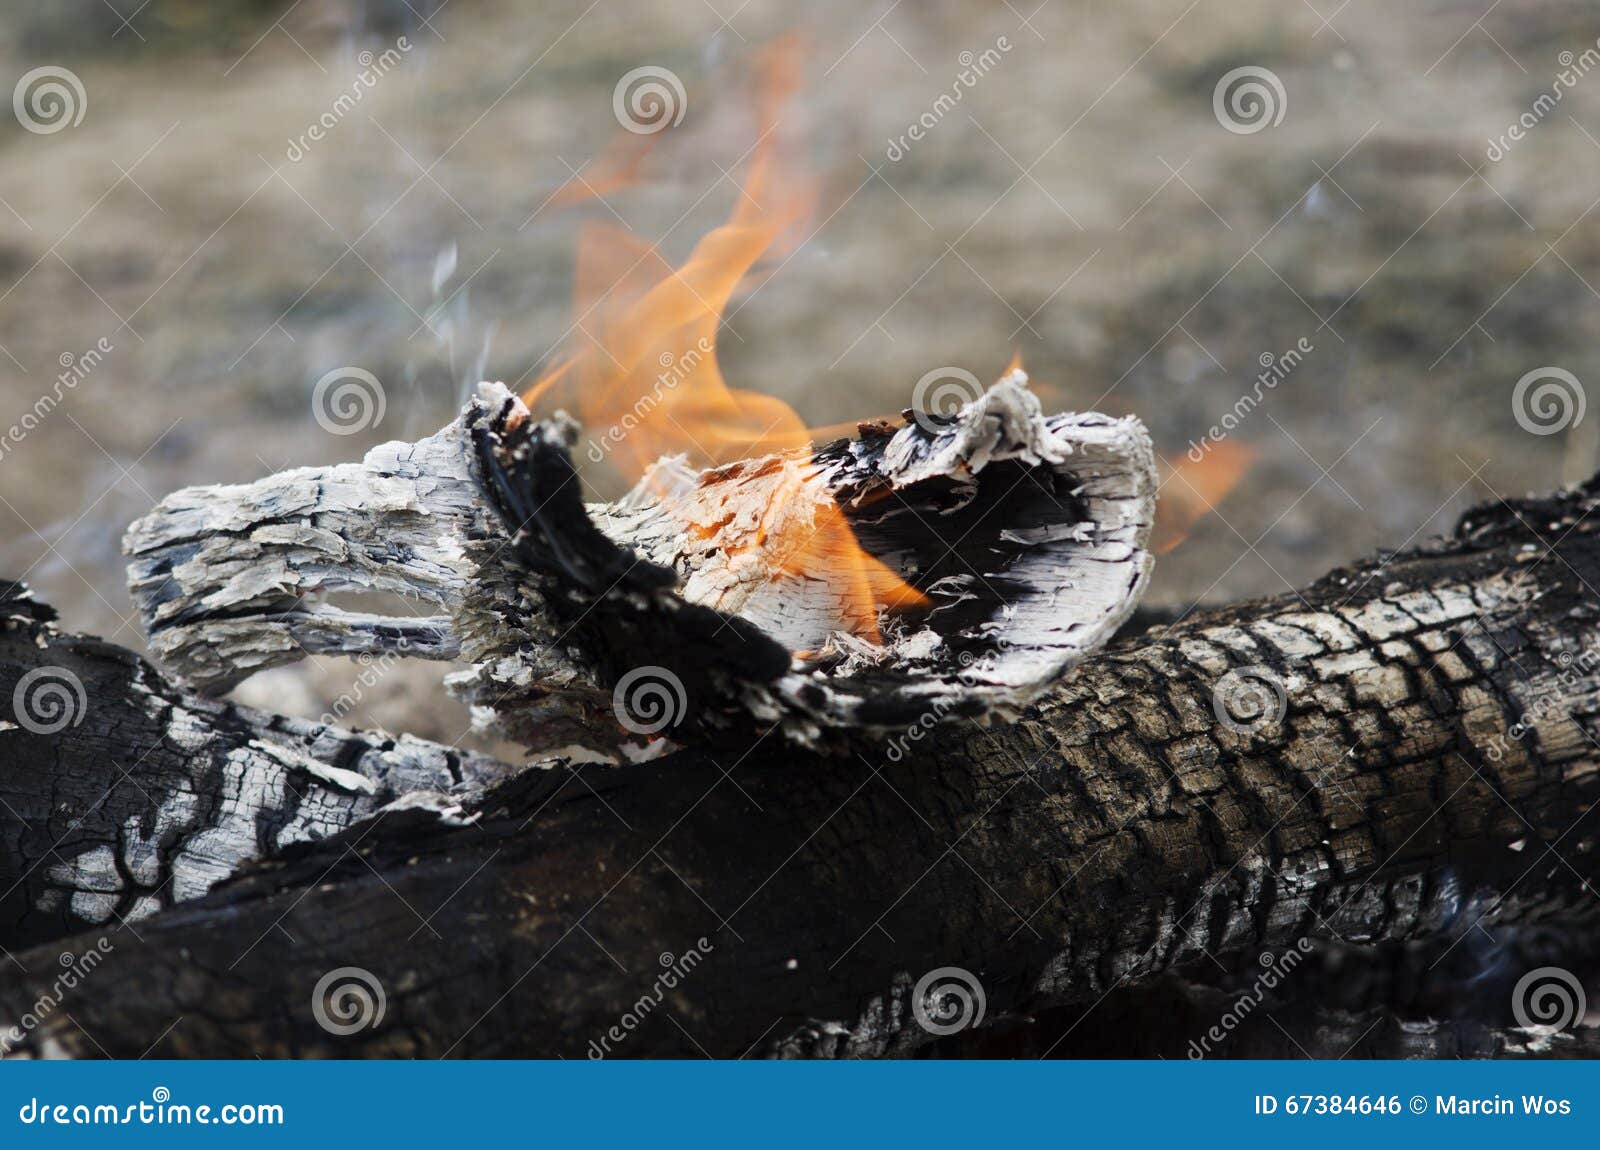 Close Up of the Wood Burns on Fire. Beautiful Fire with Flames Charred ...